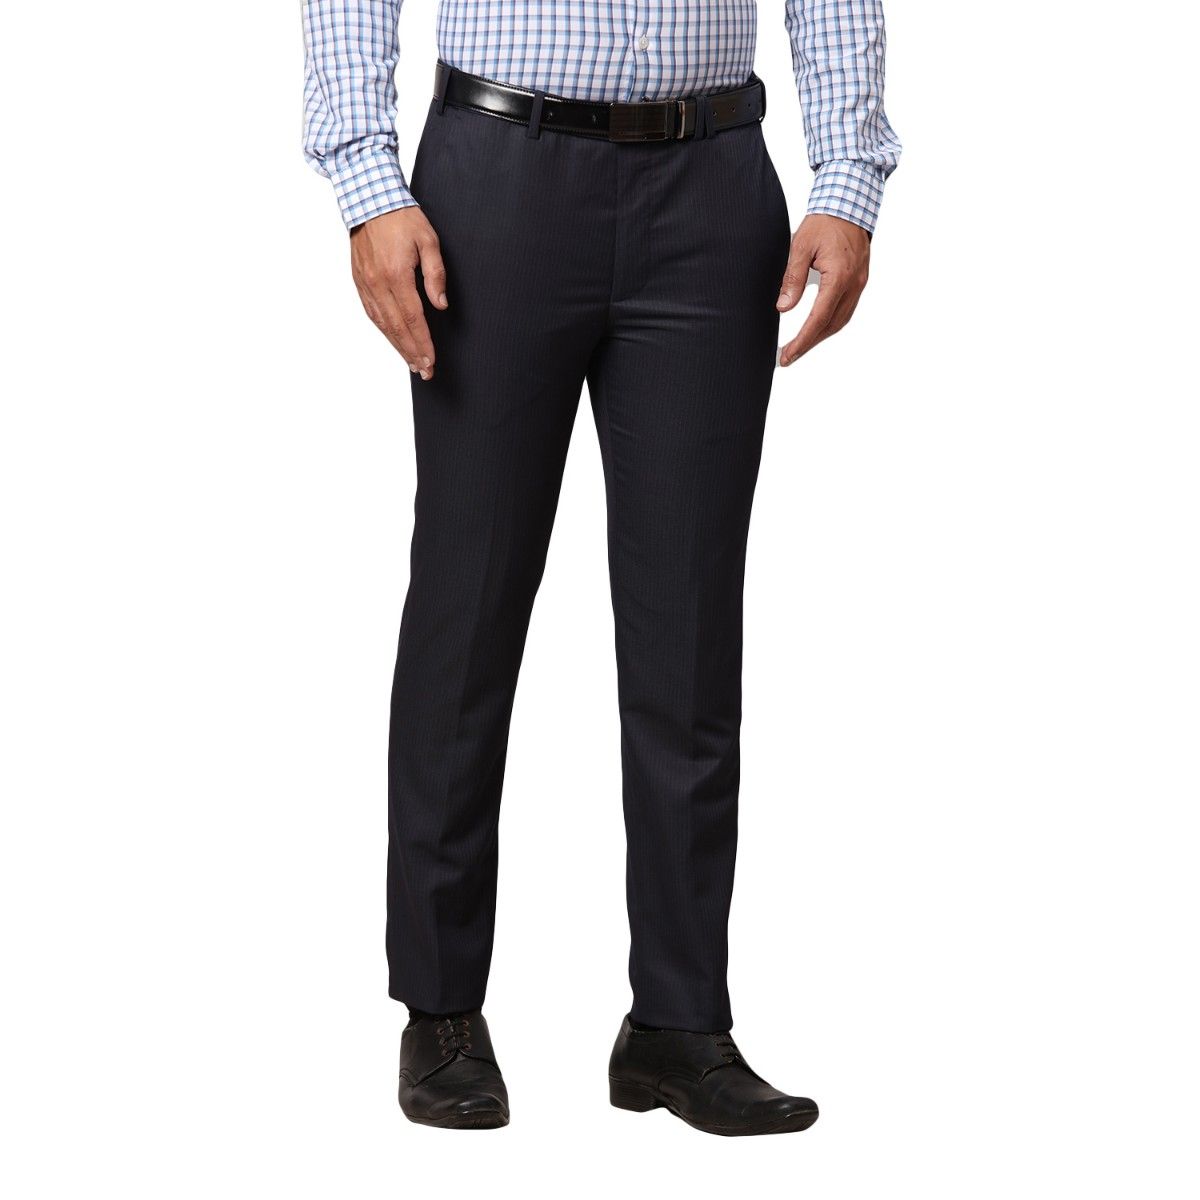 Buy Park Avenue Fawn Slim Fit Trouser Online at Low Prices in India   Paytmmallcom